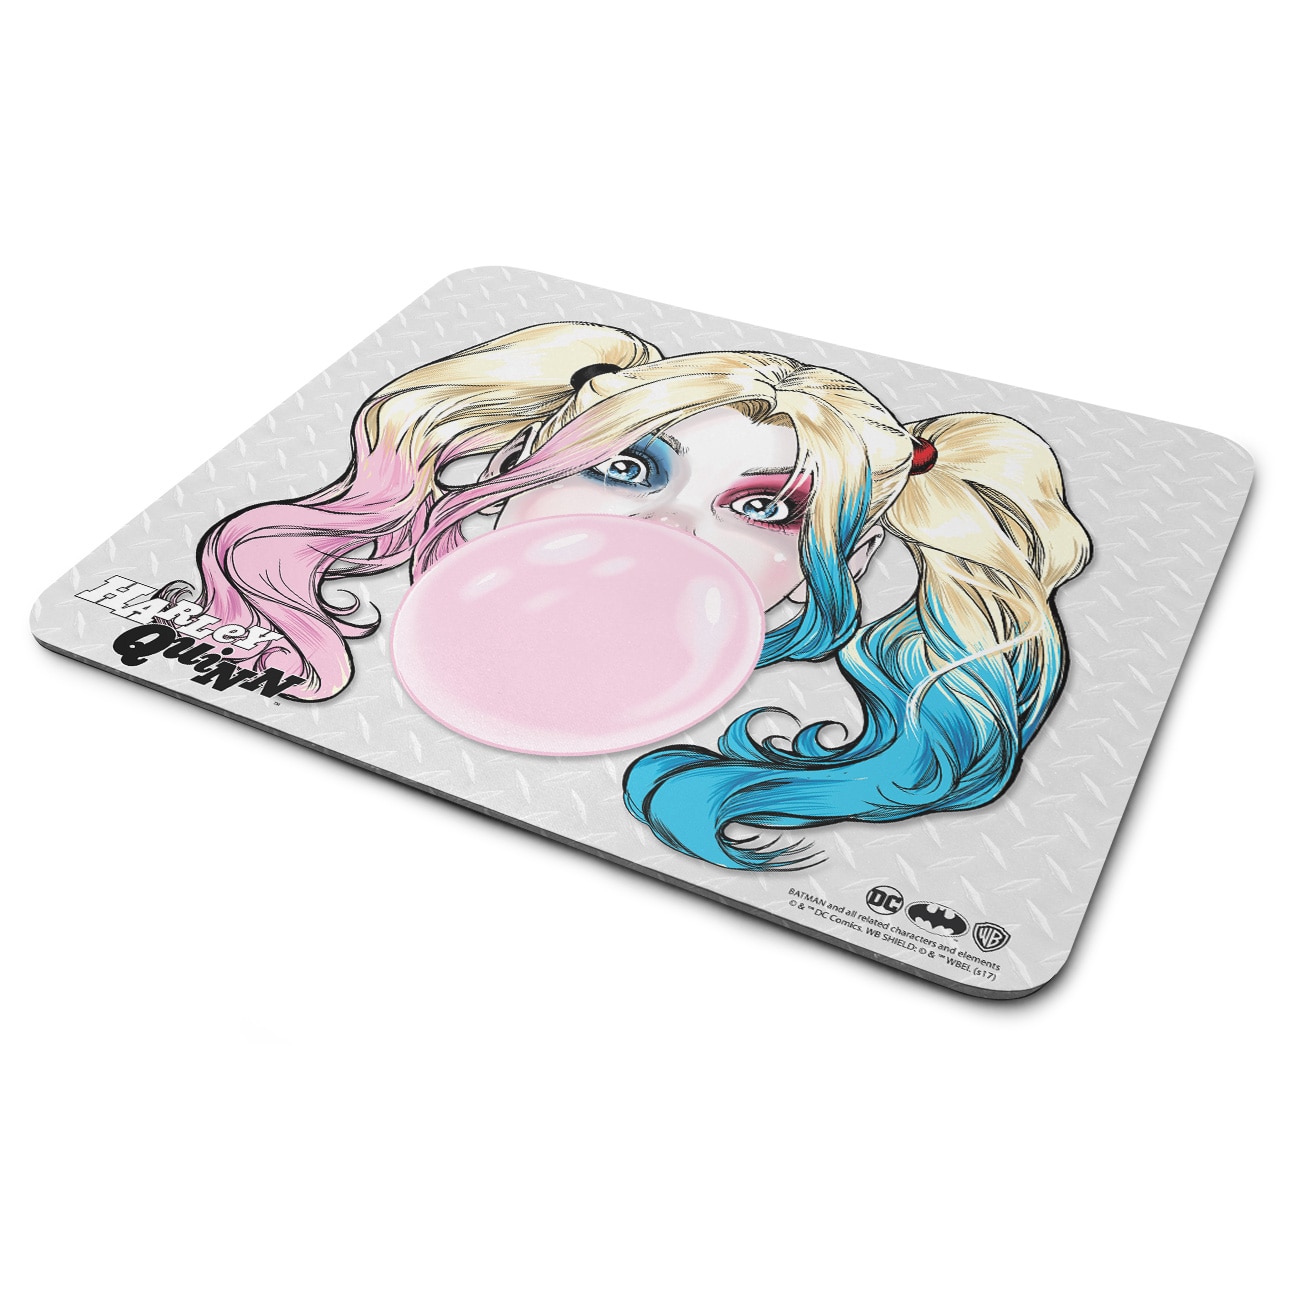 Harley Quinn Mouse Pad 3-Pack